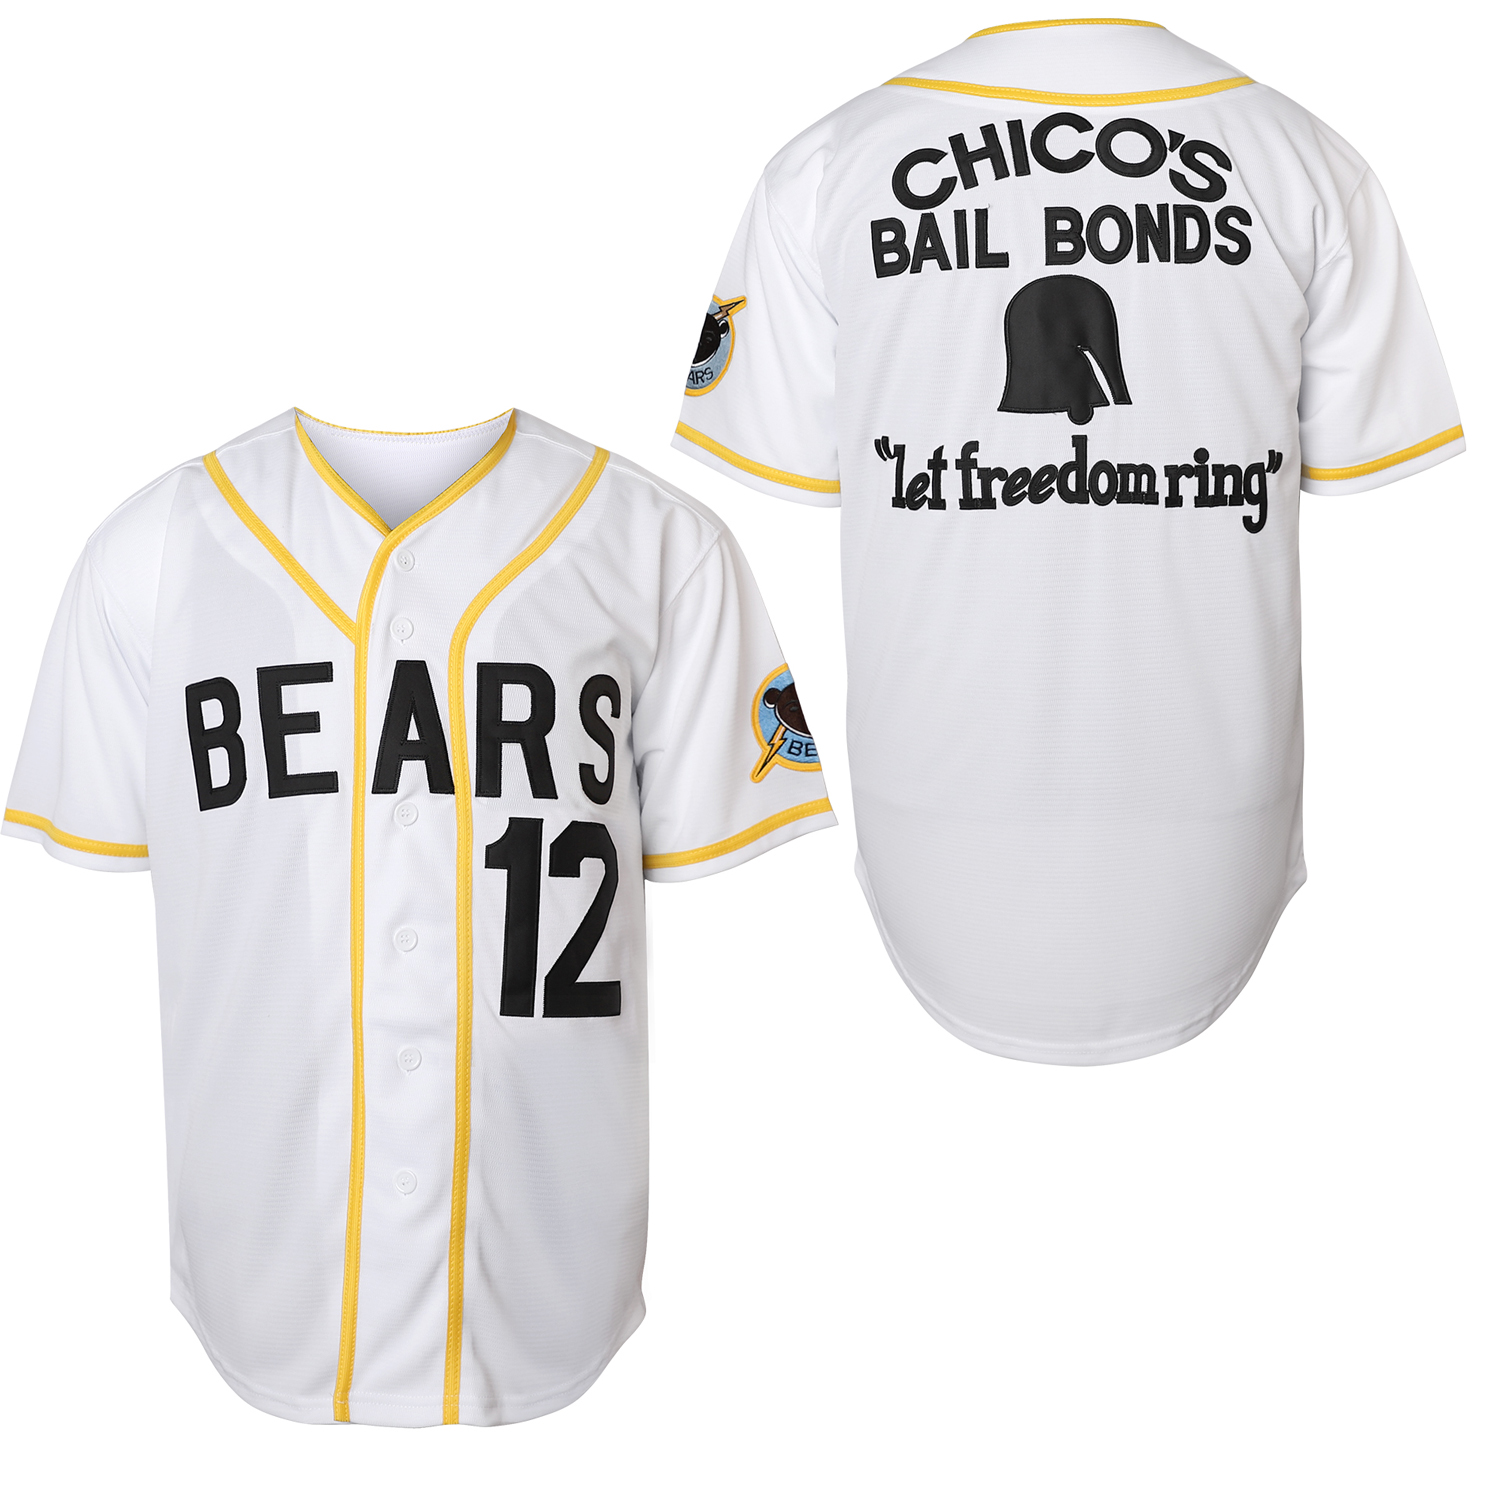 

Men Bad News Bears 3 Kelly Leak 12 Tanner Boyle 100% Stitched Movie 1976 Chico's Bail Bonds Baseball Jersey IN STOCK FAST SHIPPING S-XXXL